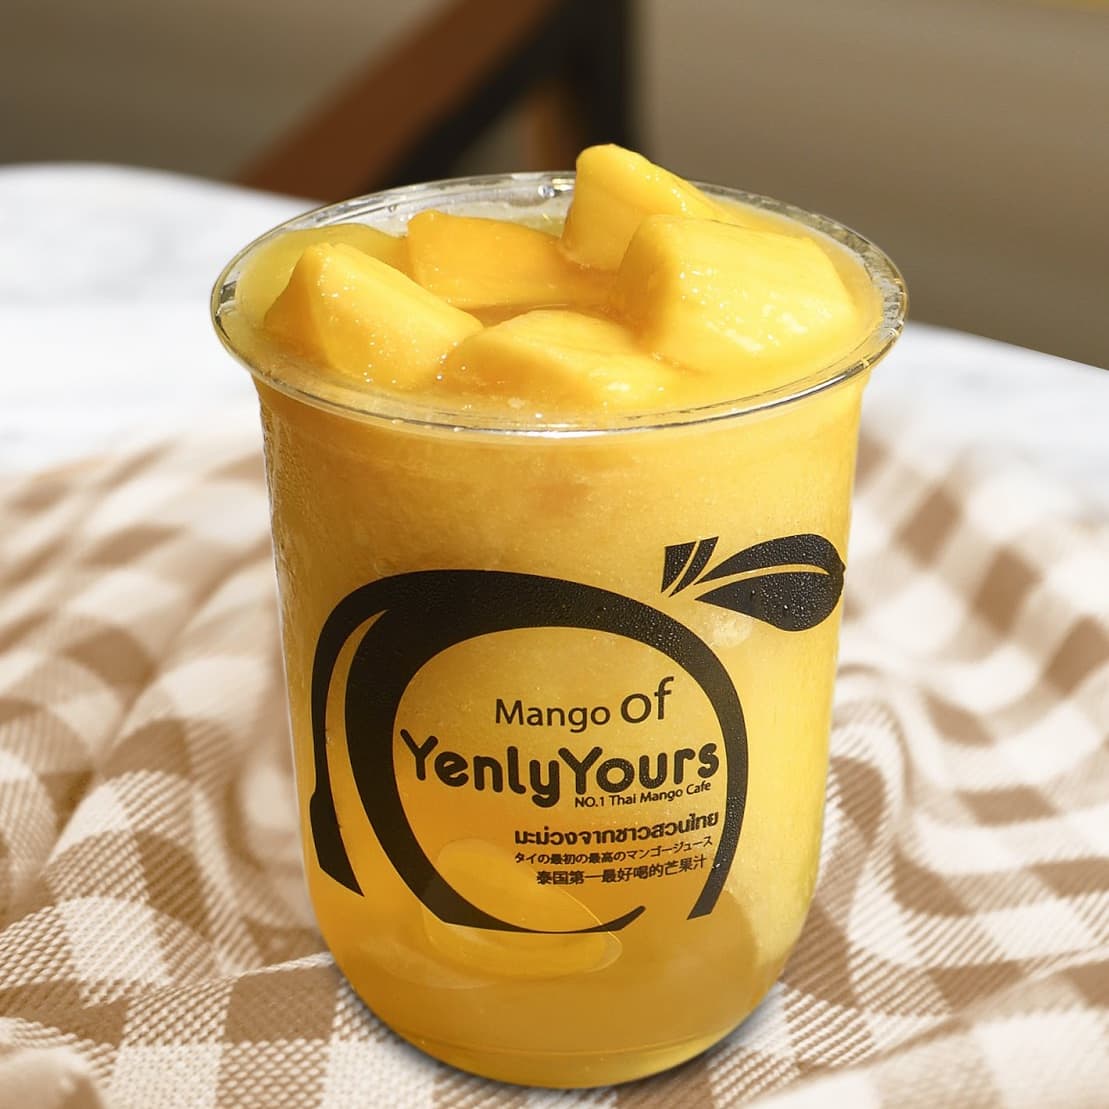 1 x Any Mango Smoothie [Exclusive Deal] at Yenly Yours - Get Deals, Cashback and Rewards with ShopBack GO